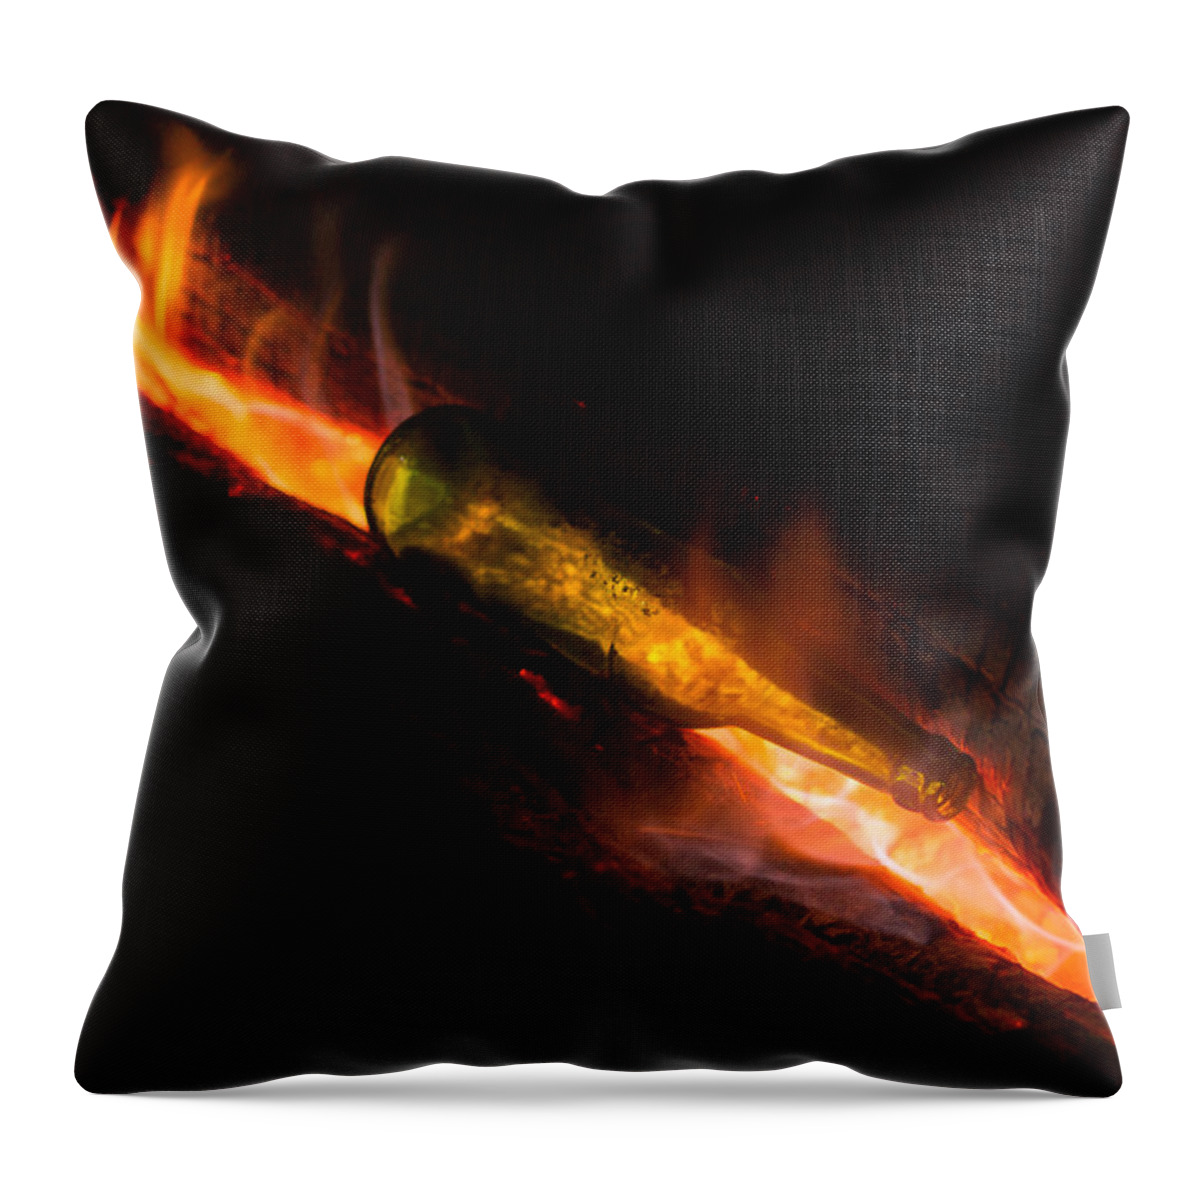 Background Throw Pillow featuring the photograph Green Glass Bottle and Campfire by John Williams